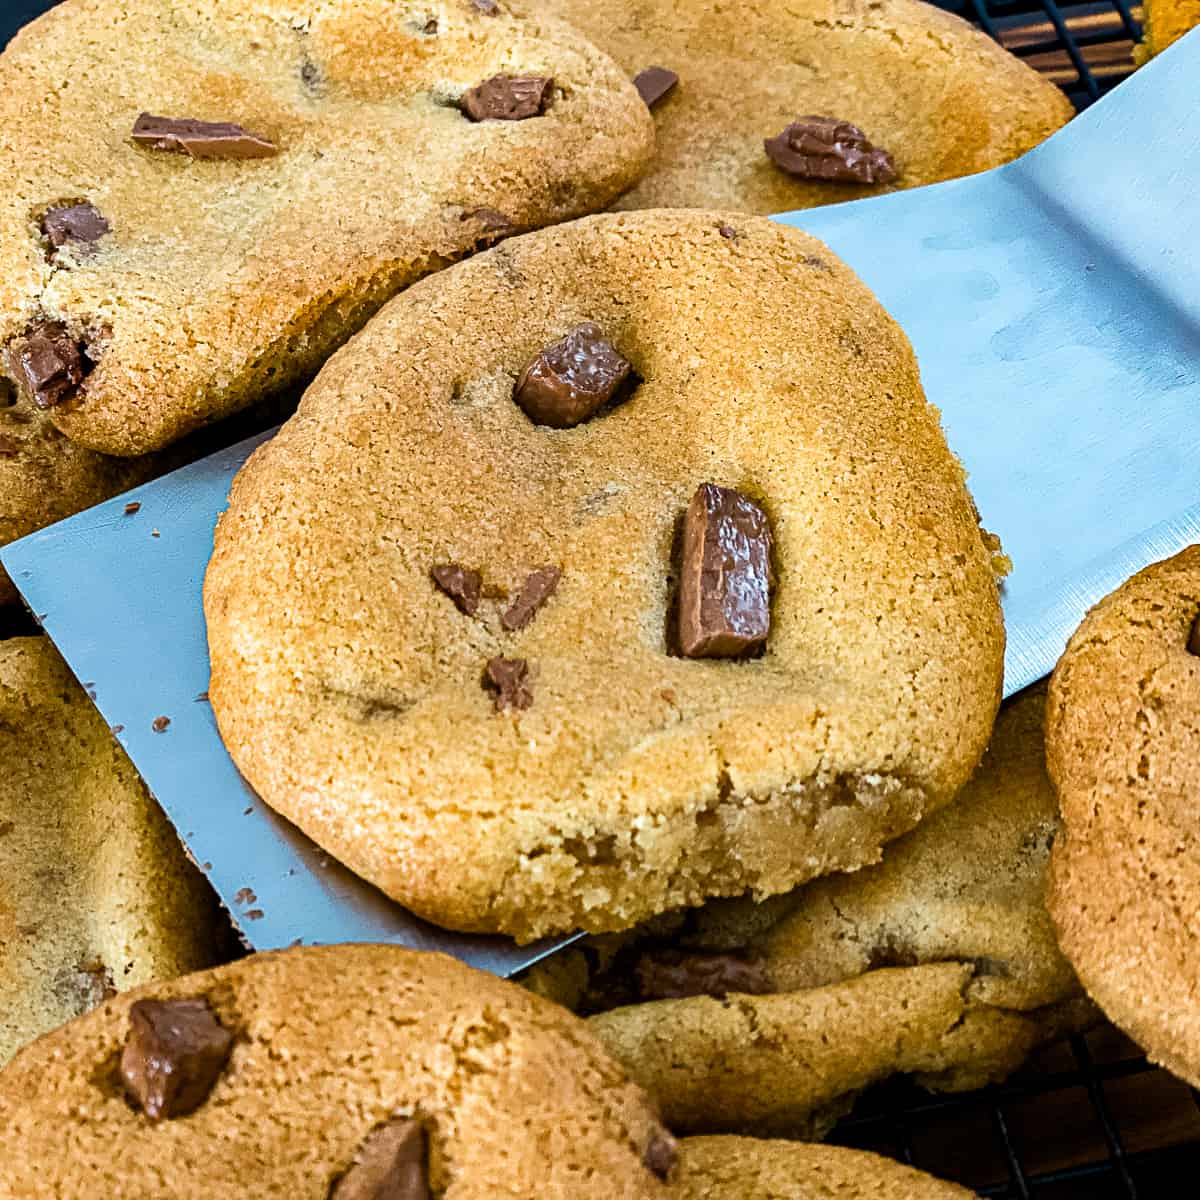 https://sipbitego.com/wp-content/uploads/2021/06/Air-Fryer-Chocolate-Chip-Cookies-Sip-Bite-Go-baking-rack-cooling-air-fried-chocolate-chip-cookies-with-spatula-holding-a-cookie-feature.jpg